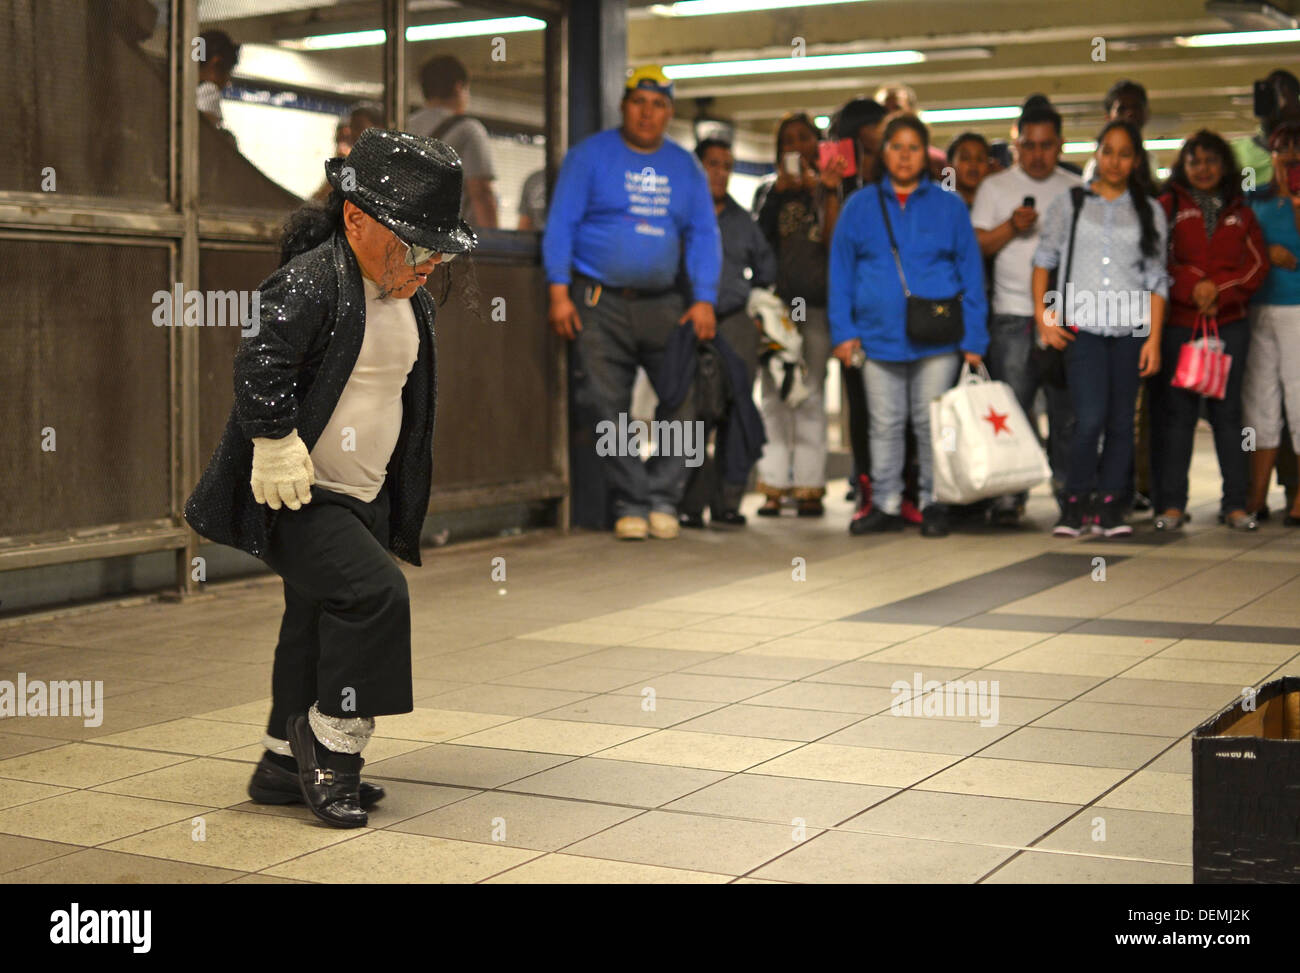 Alex, a little person Michael Jackson impersonator performs before a crowd at the 74th Street Subway Station in Queens, New York Stock Photo